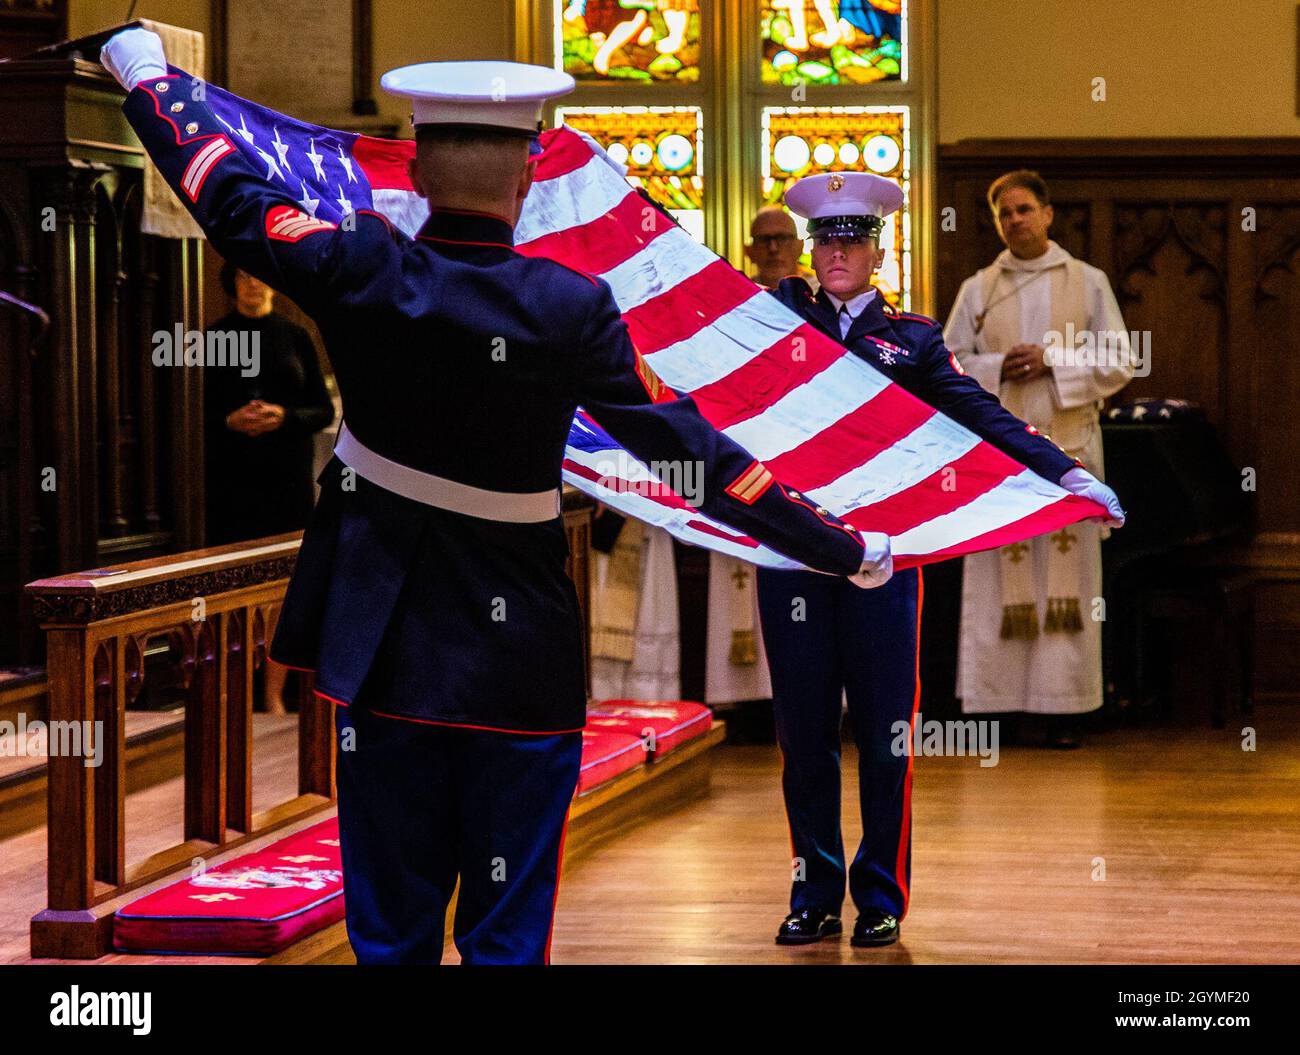 Marines with Marine Forces Reserves present the American flag at the memorial service of Brooke Helm Duncan at The Trinity Episcopal Church, New Orleans, Feb. 1, 2020. Mr. Duncan was a retired Corsair pilot for the United States Marine Corps and an Active civic leader in his community. (U.S. Marine Corps photo by Lance Cpl. Samwel Tabancay) Stock Photo